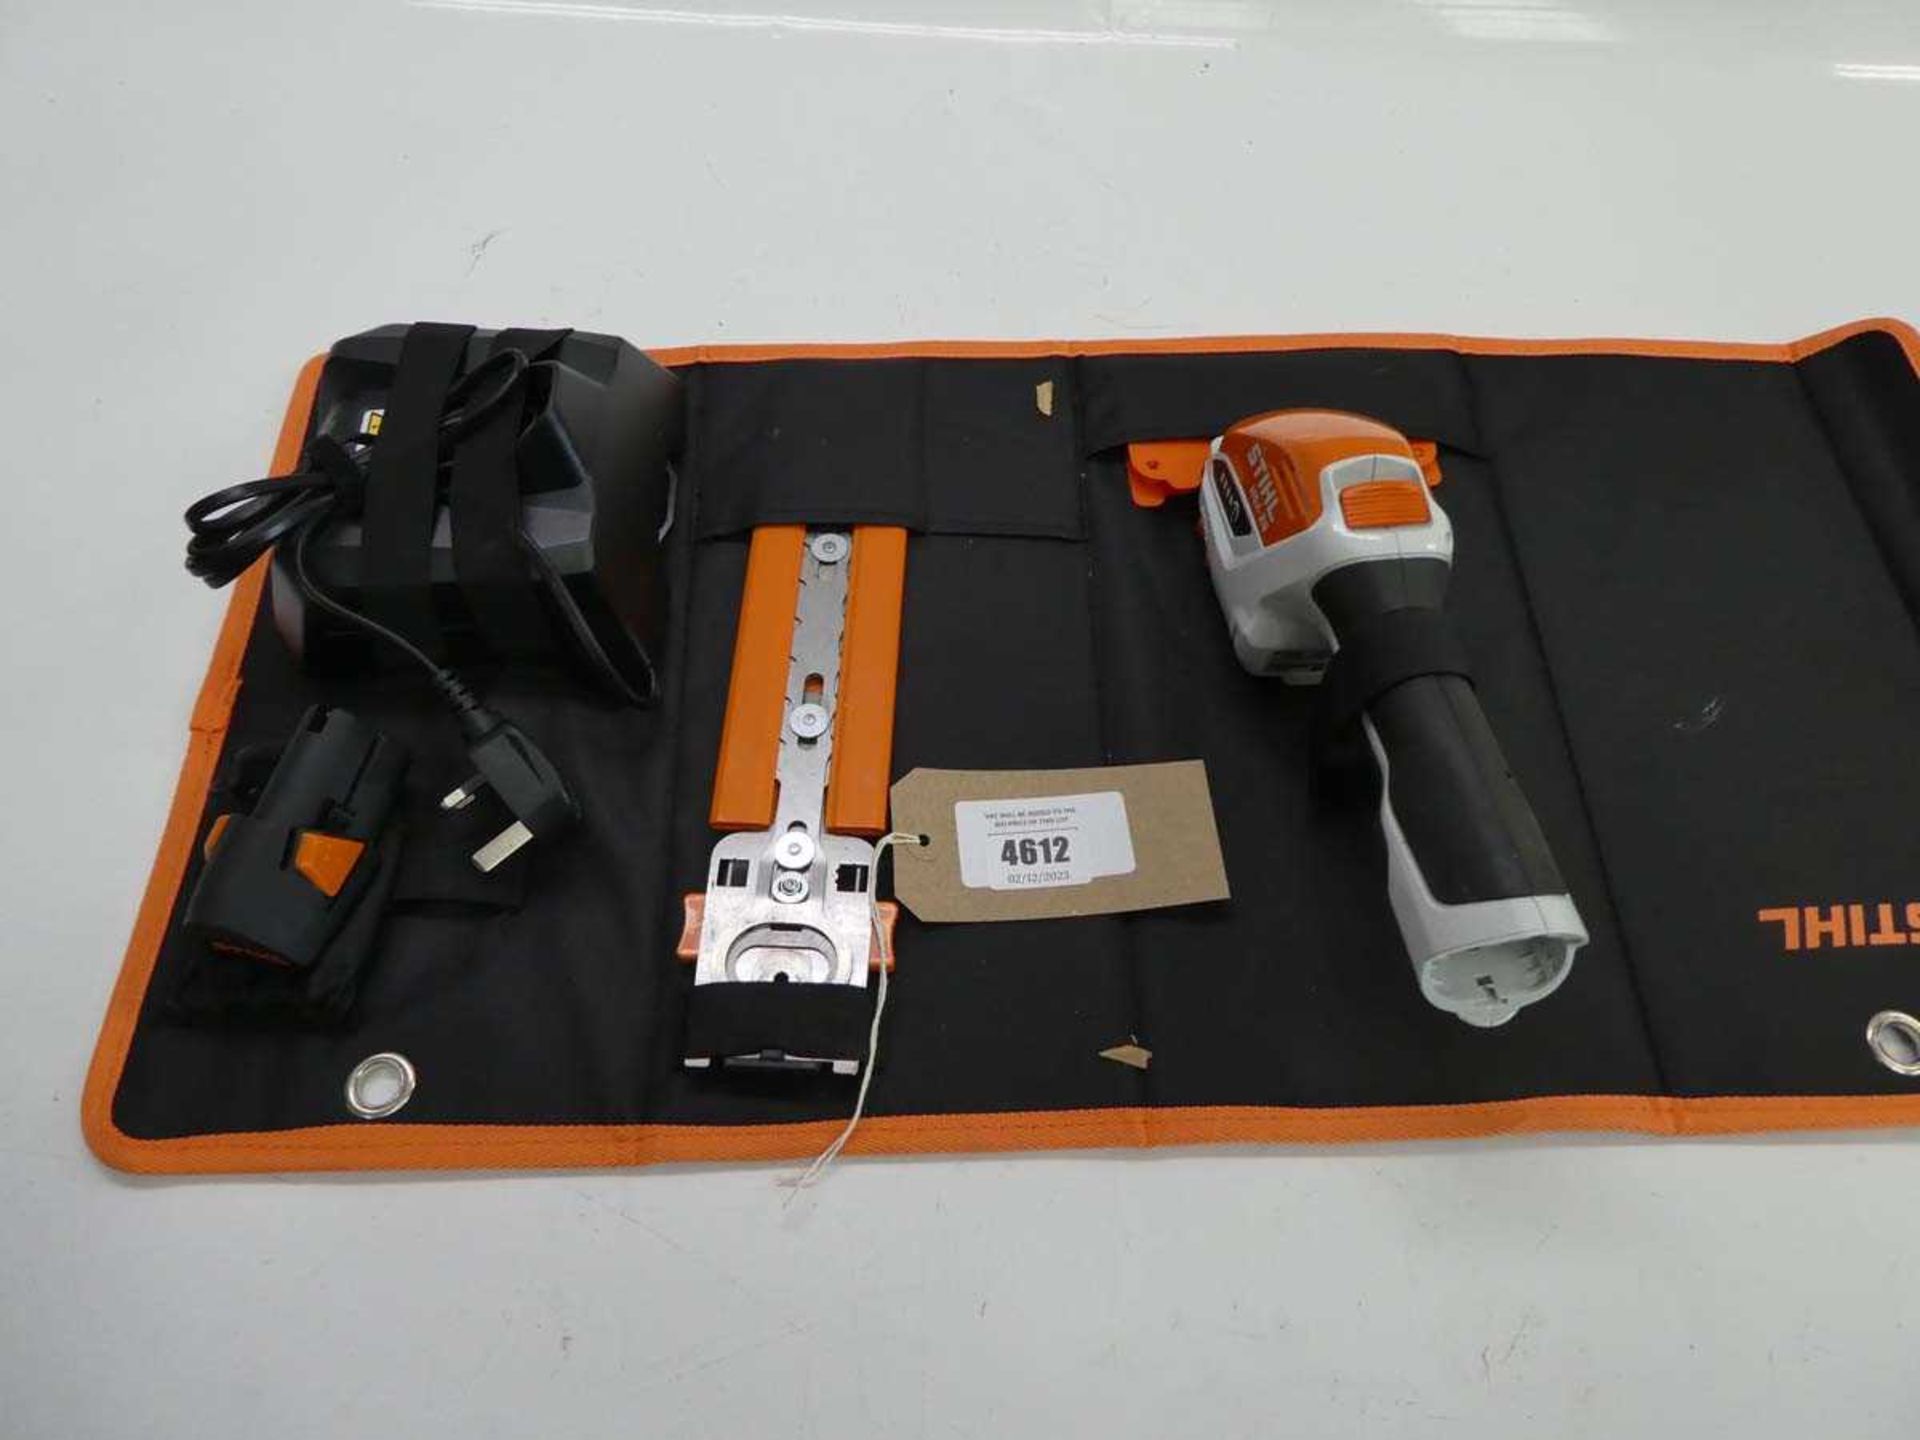 +VAT Stihl HSA26 shears, battery, battery charger and carry case